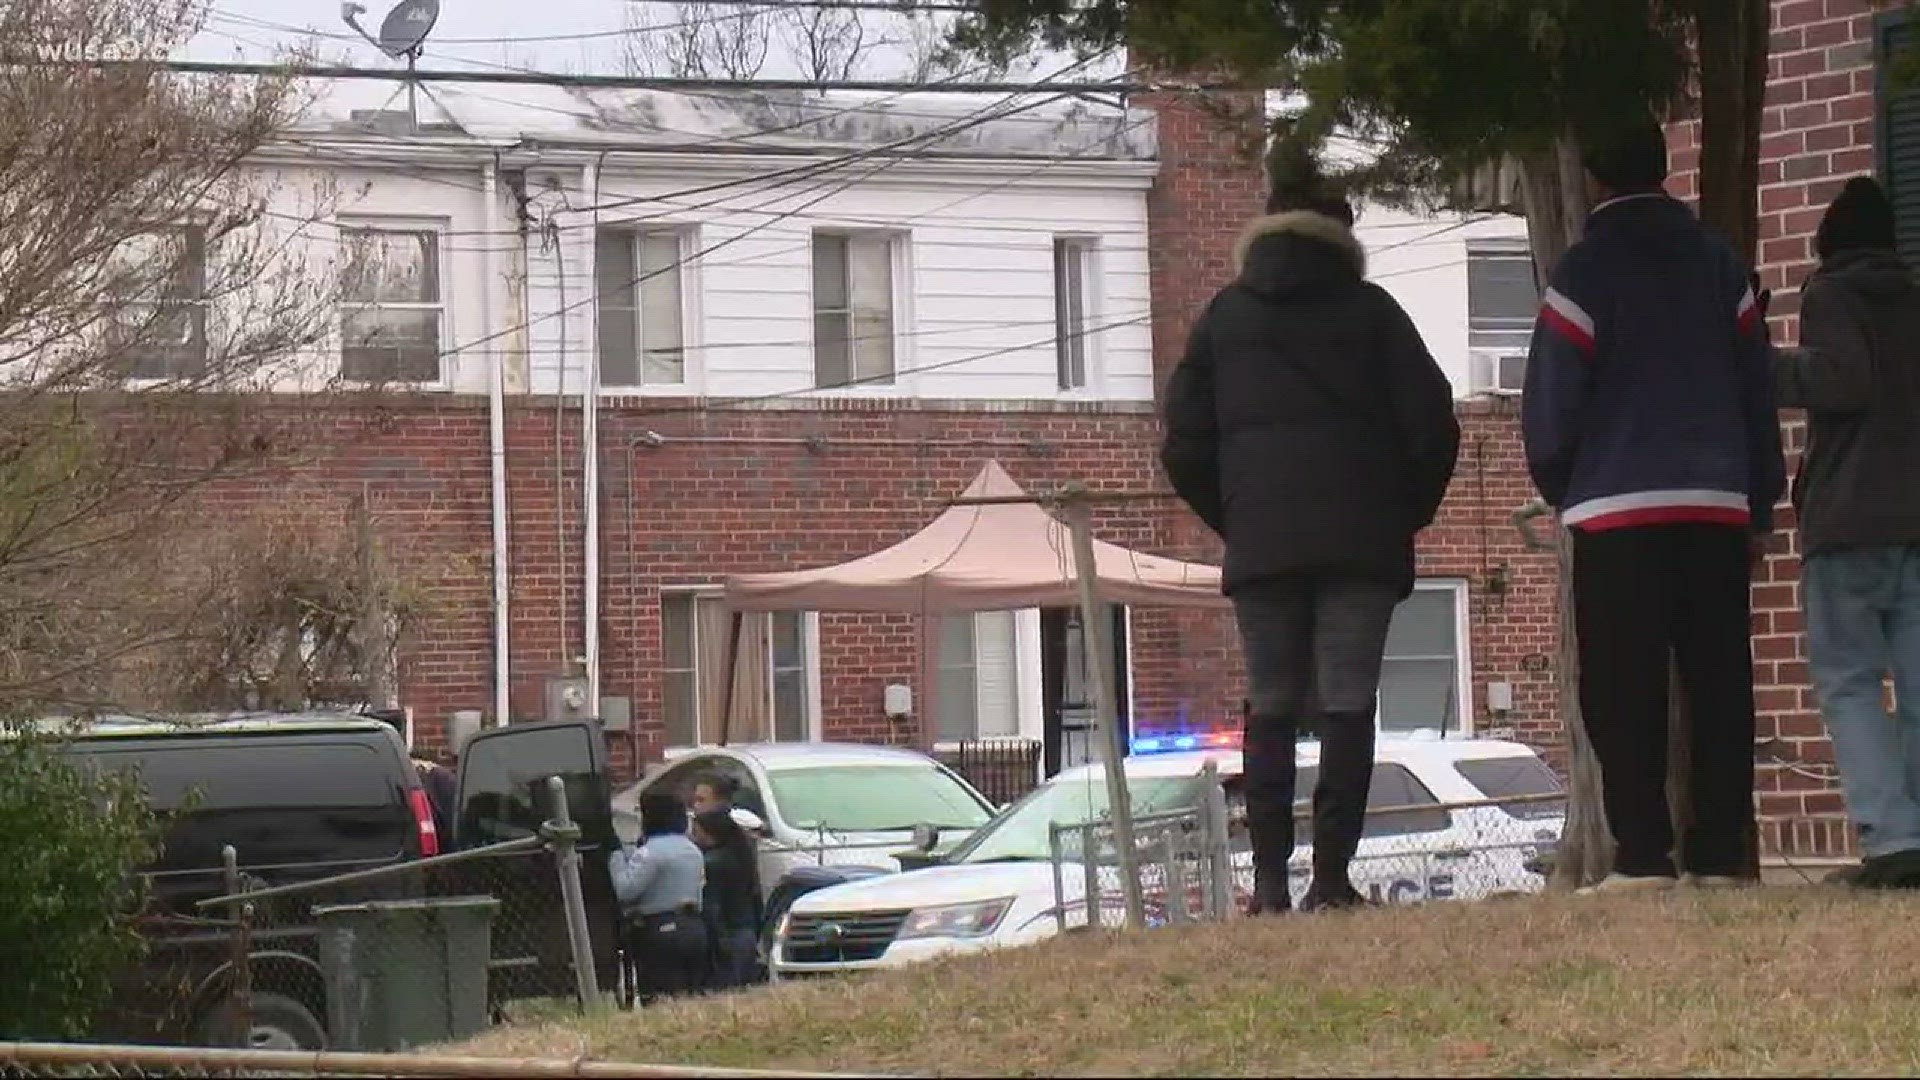 Neighbors have been searching for weeks for a missing woman, and now they fear the worst. Police found a woman's body in an alley in Northeast D.C.